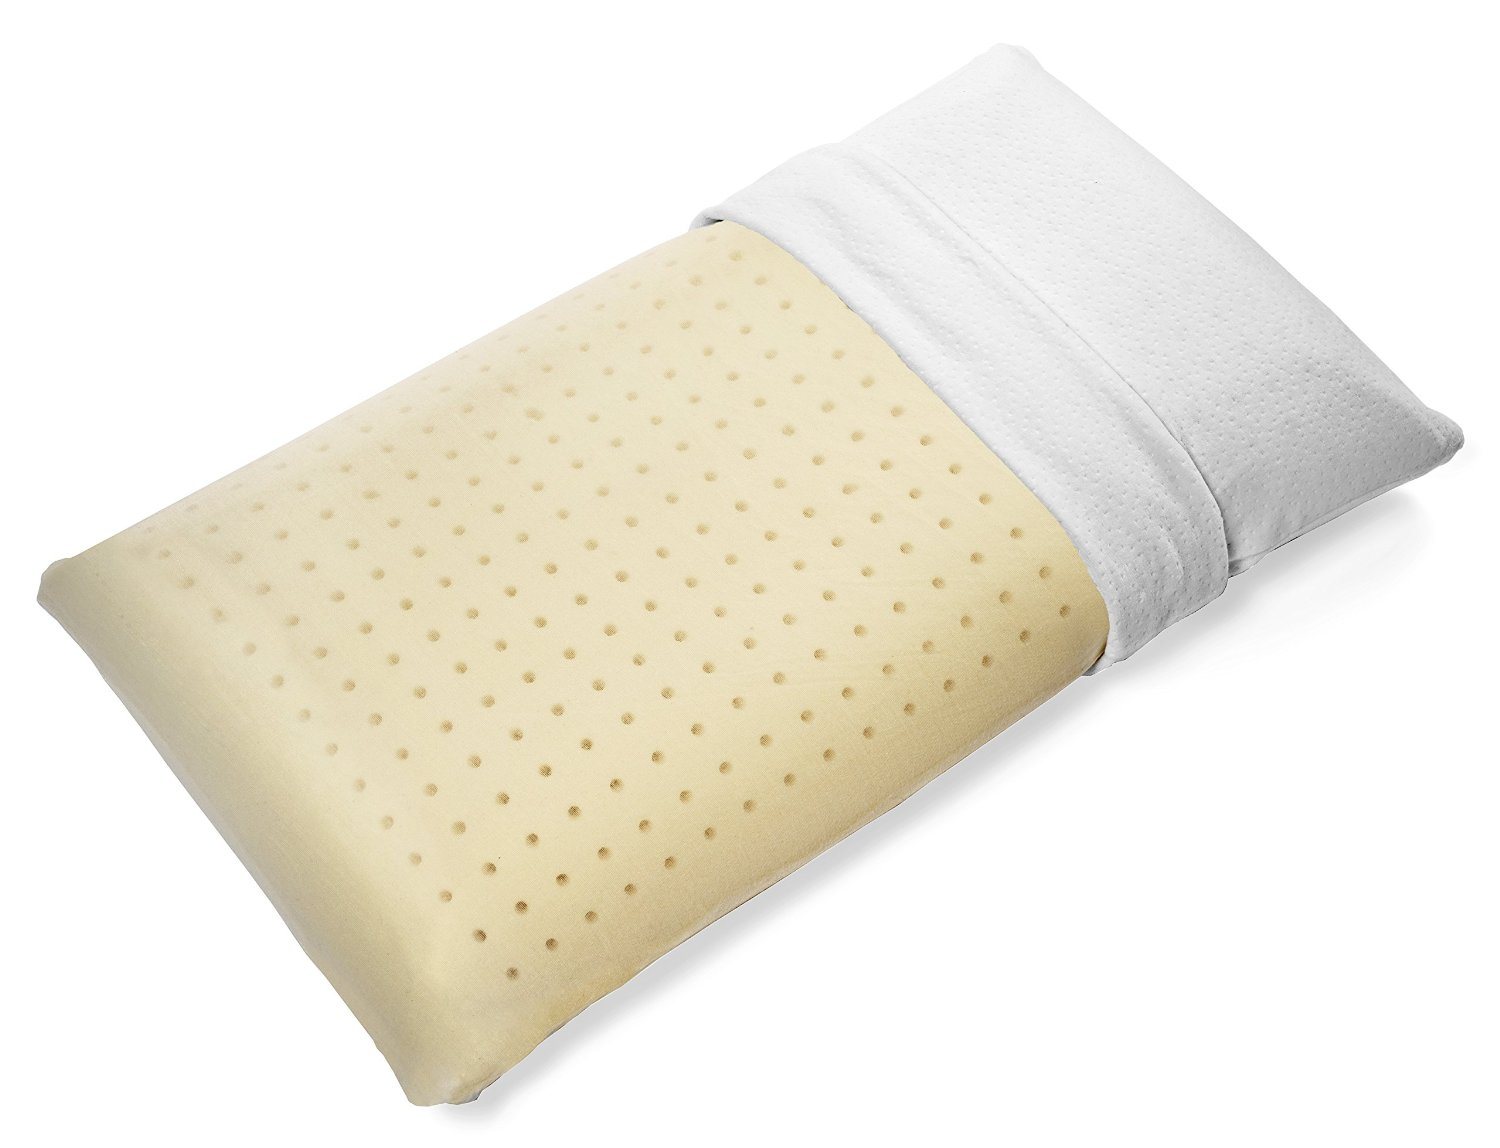 Everything You Should Know About Memory Foam Pillows